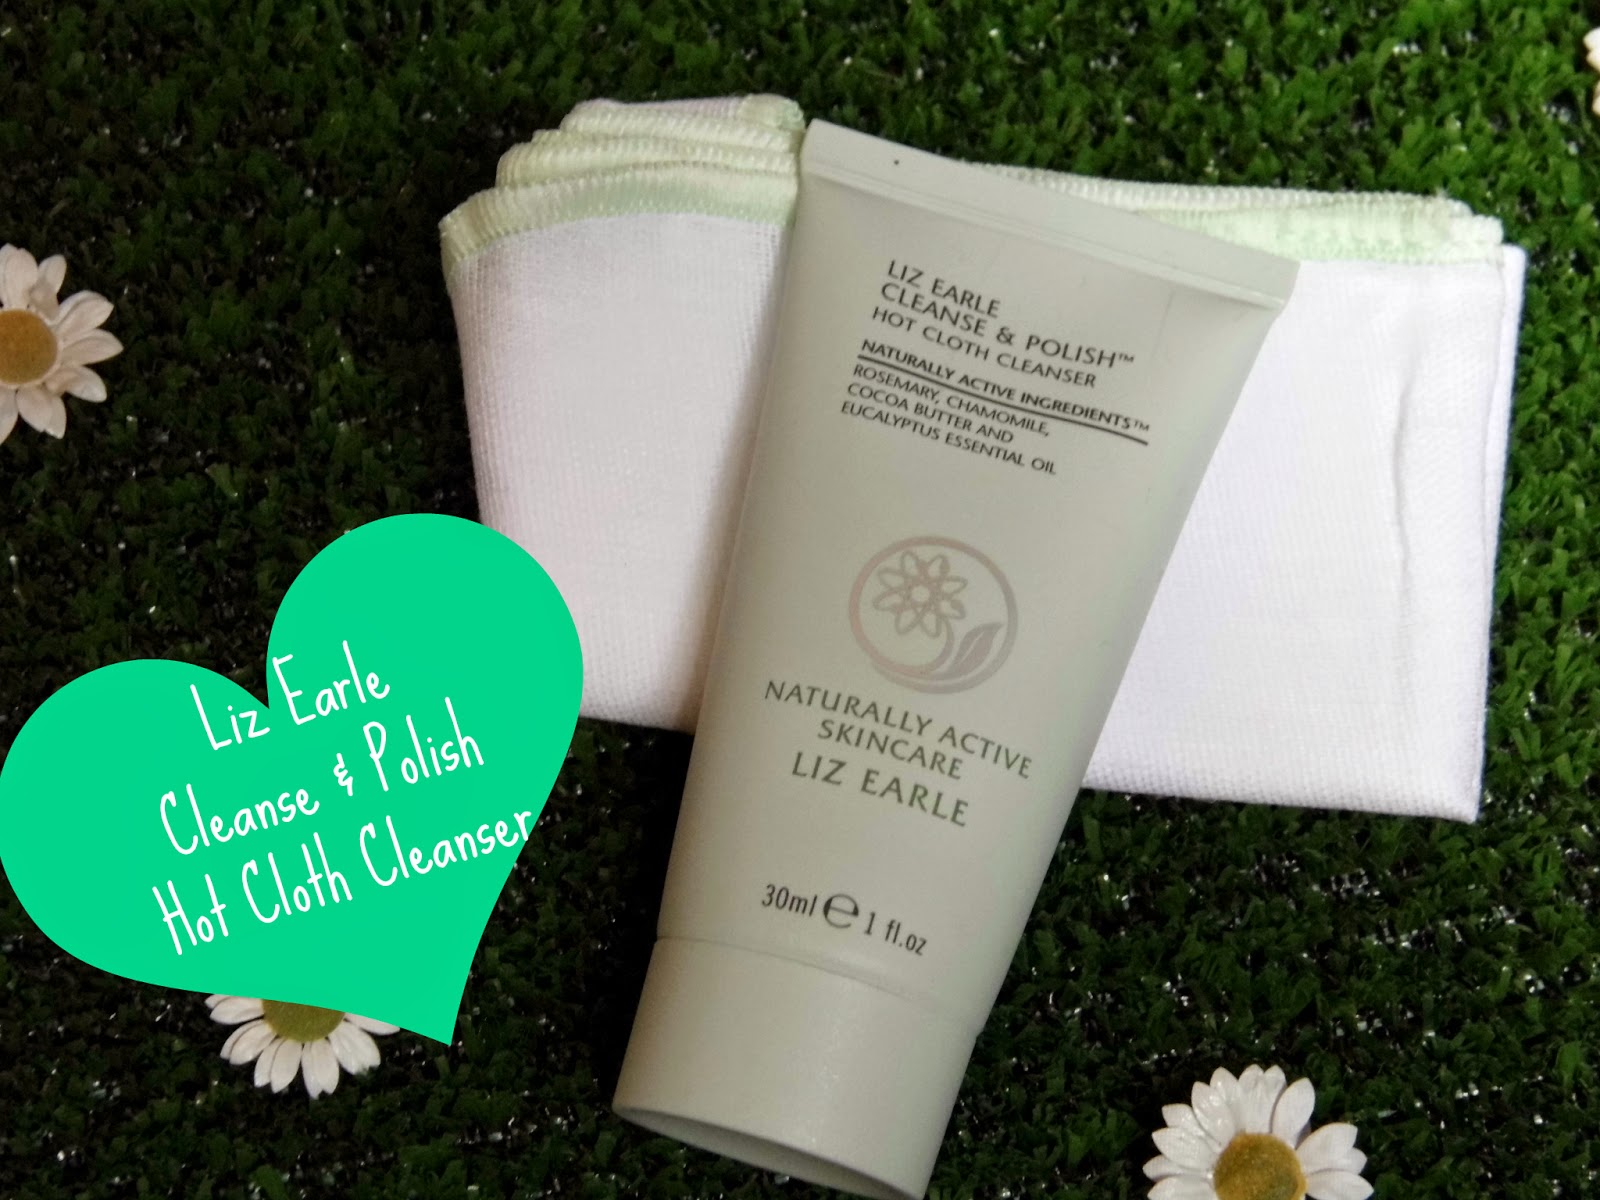 Lipsticks And Lashes Liz Earle Cleanse And Polish Hot Cloth Cleanser